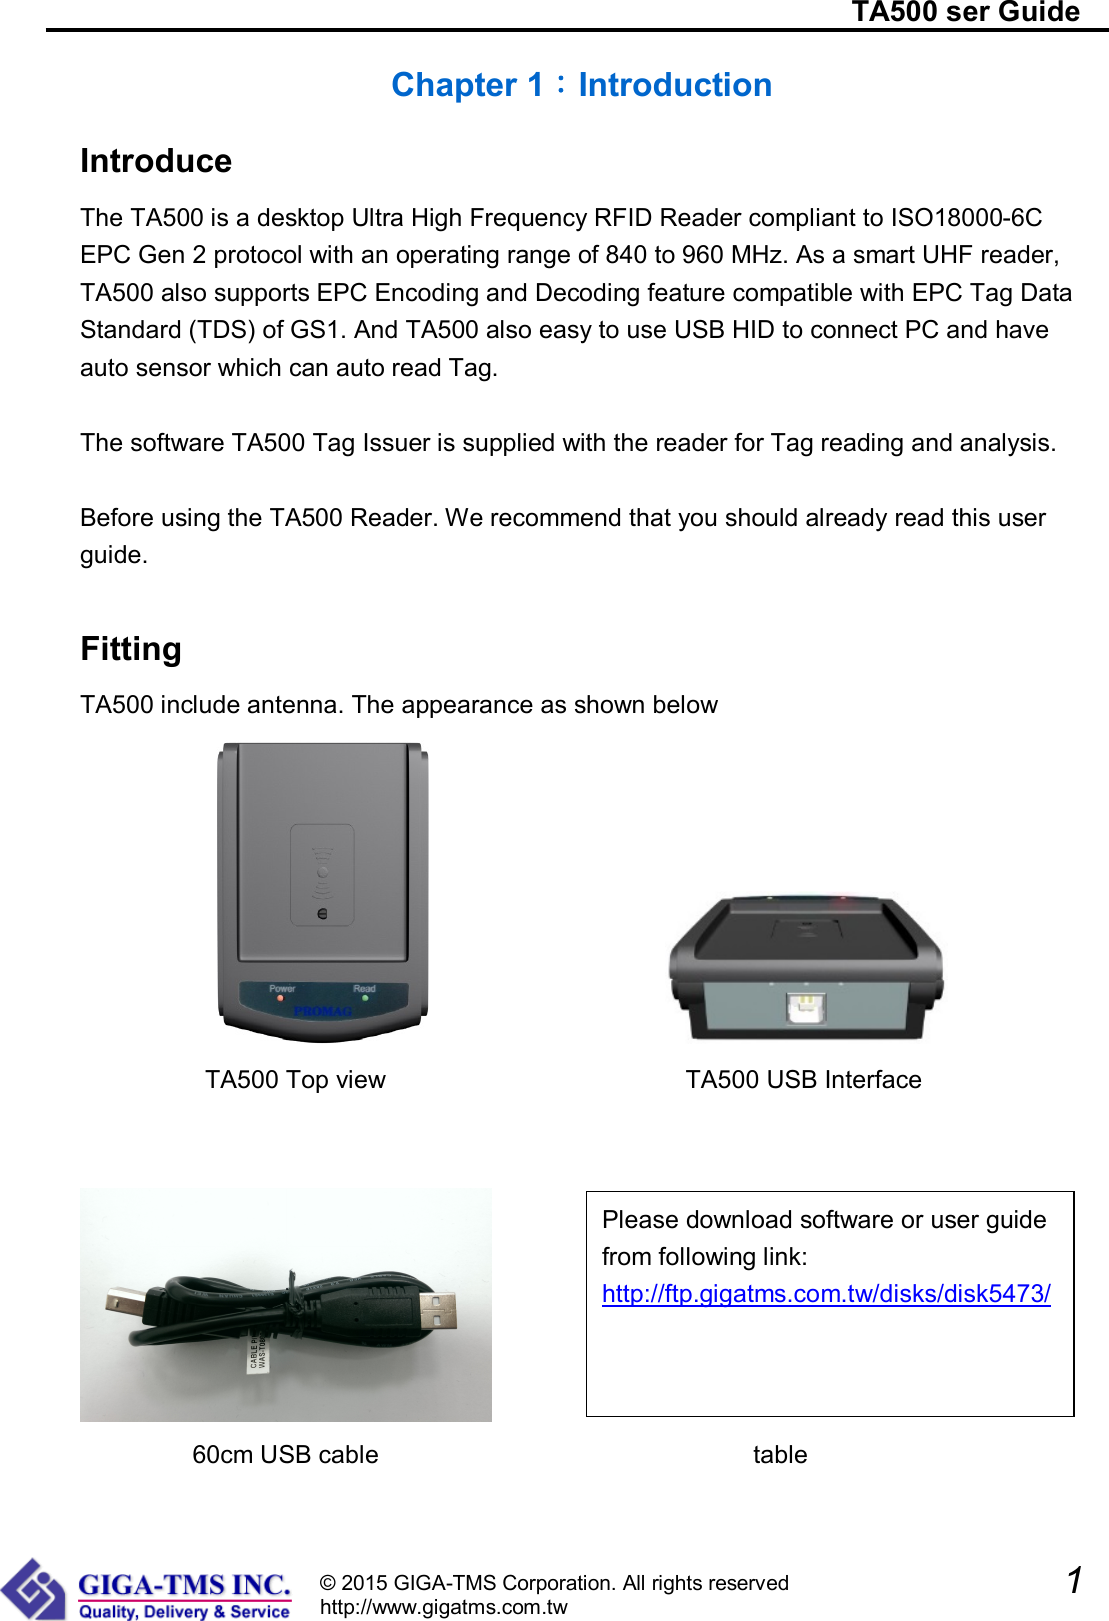                                                                           TA500 ser Guide               1  © 2015 GIGA-TMS Corporation. All rights reserved http://www.gigatms.com.tw Chapter 1：Introduction Introduce The TA500 is a desktop Ultra High Frequency RFID Reader compliant to ISO18000-6C EPC Gen 2 protocol with an operating range of 840 to 960 MHz. As a smart UHF reader, TA500 also supports EPC Encoding and Decoding feature compatible with EPC Tag Data Standard (TDS) of GS1. And TA500 also easy to use USB HID to connect PC and have auto sensor which can auto read Tag.  The software TA500 Tag Issuer is supplied with the reader for Tag reading and analysis.    Before using the TA500 Reader. We recommend that you should already read this user guide.  Fitting TA500 include antenna. The appearance as shown below                      TA500 Top view                                                TA500 USB Interface          60cm USB cable                              table Please download software or user guide from following link: http://ftp.gigatms.com.tw/disks/disk5473/ 